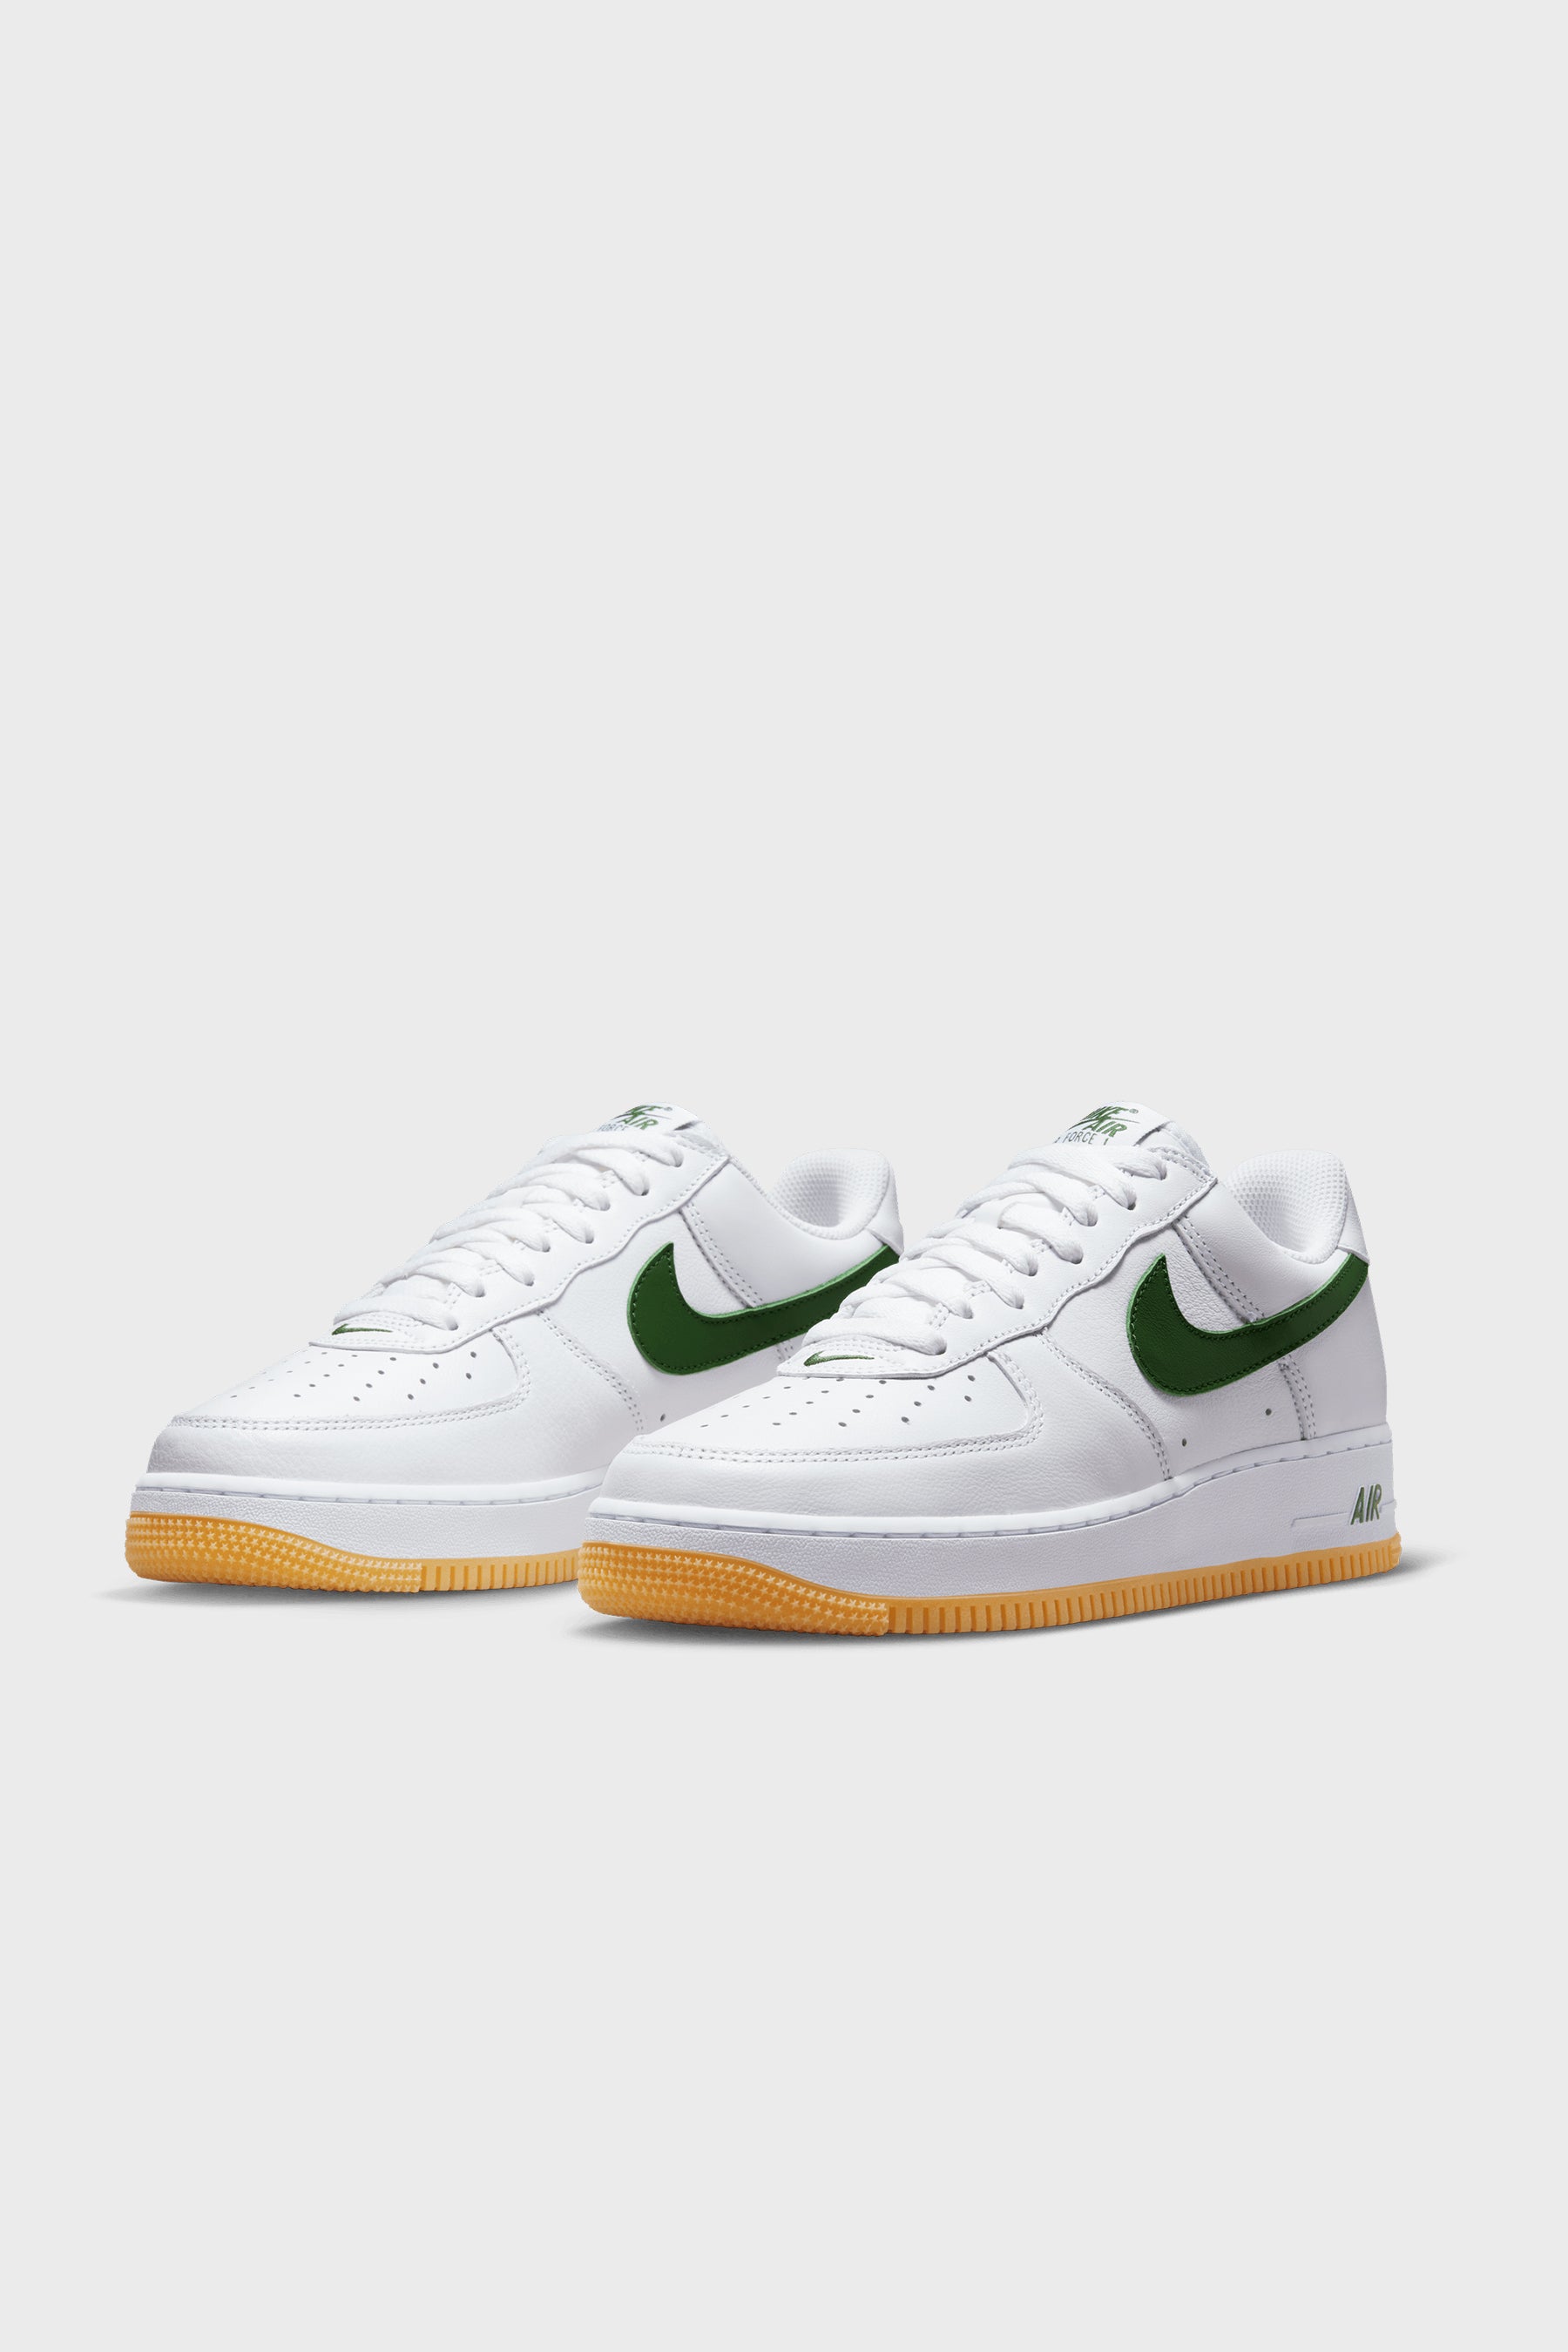 Air Force 1 Low Retro QS White/Forest Green/Gum Yellow FD7039-101